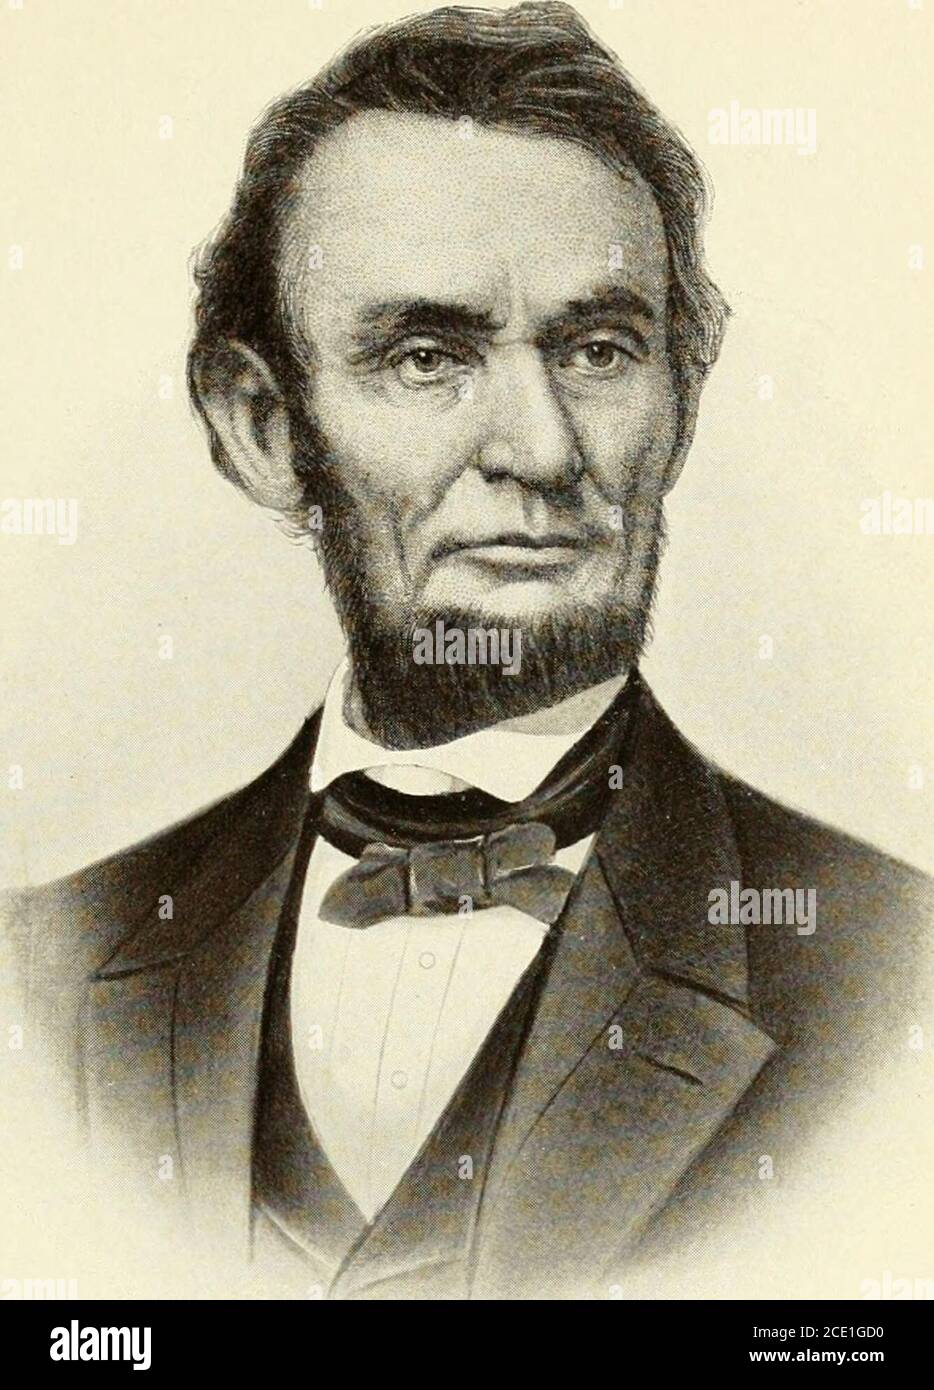 . A compilation of the messages and papers of the presidents . ABRAHAM LINCOLN with official portrait engraved from copy of original In steai. ,&lt;y/fsJ^t^^^^&lt;:^C?z/y 906 tY BUREAU OF NATrONAU LITERATURE AND Abraham Lincoln Abraham Lincoln was born in Hardin County, Ky., February 12,1809. His earliest ancestor in America was Samuel Lincoln, of Norwich,E^jgland, who settled in Hingham, Mass., where he died, leaving a son,Mordecai, whose son of the same name removed to Monmouth, N. J.,and thence to Berks County, Pa., where he died in 1735. One of hissons, John, removed to Rockingham County, Stock Photo